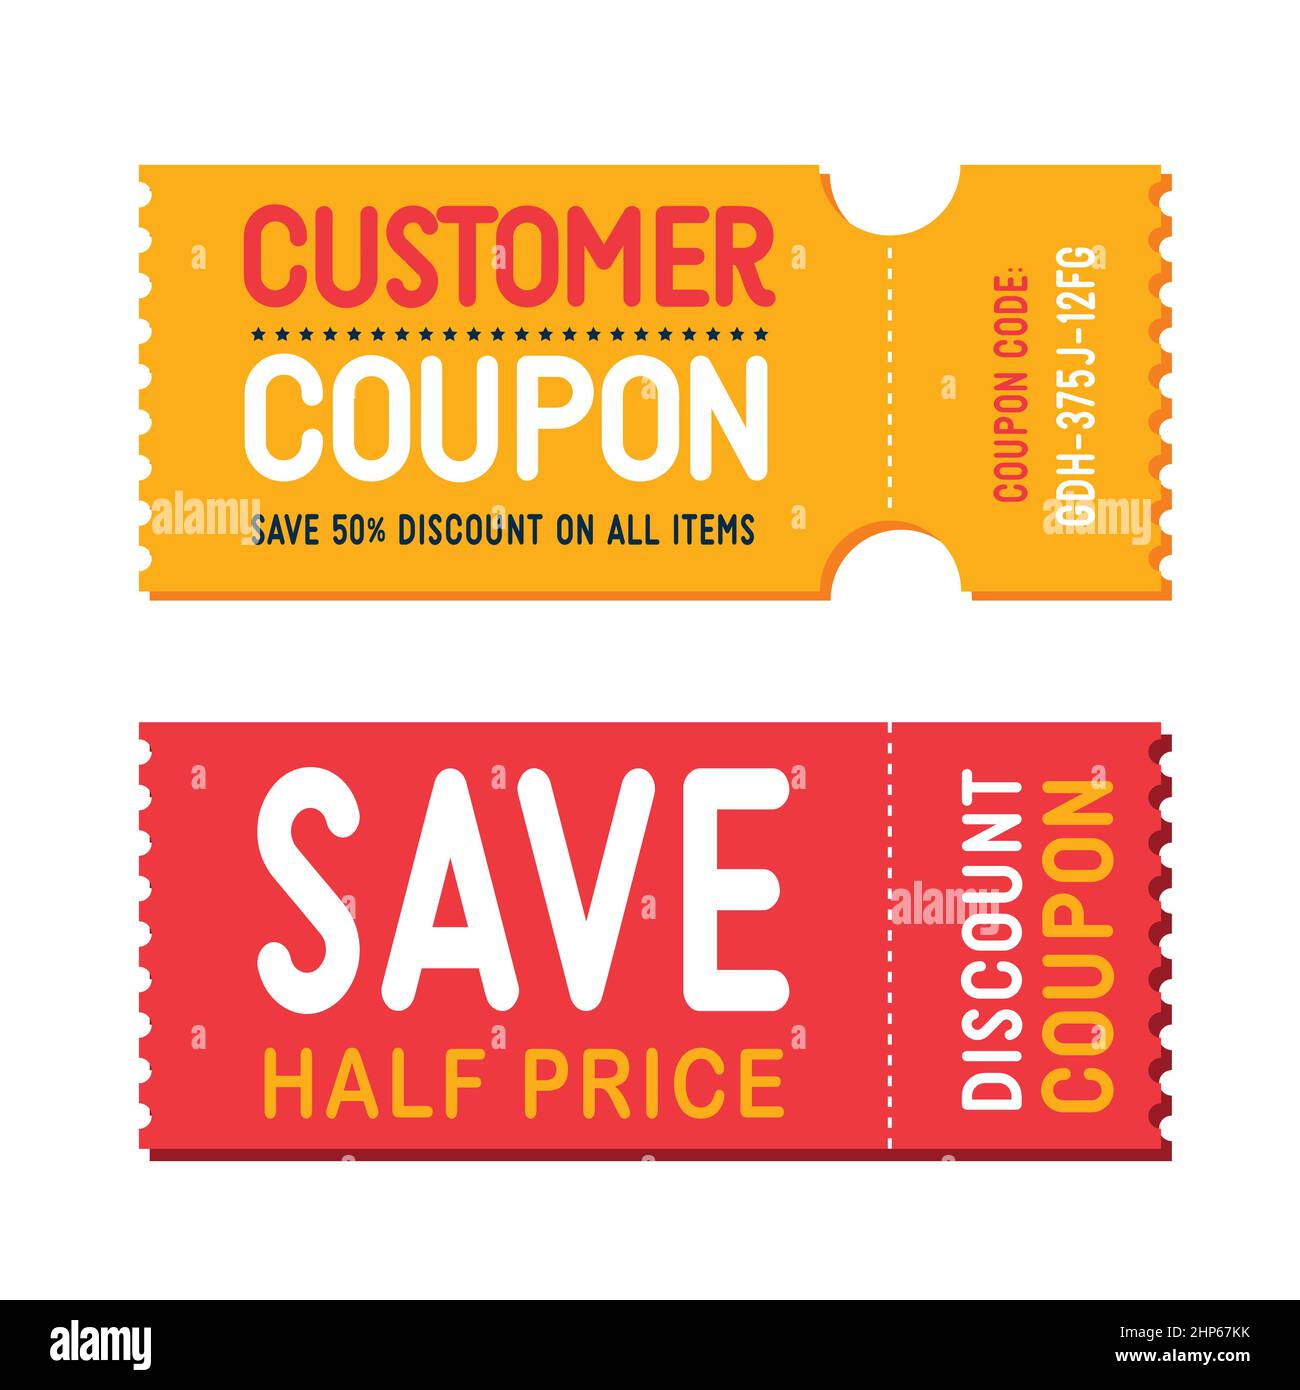 Discount coupon. Half price offer, promo code gift voucher and coupons template. Stock Vector